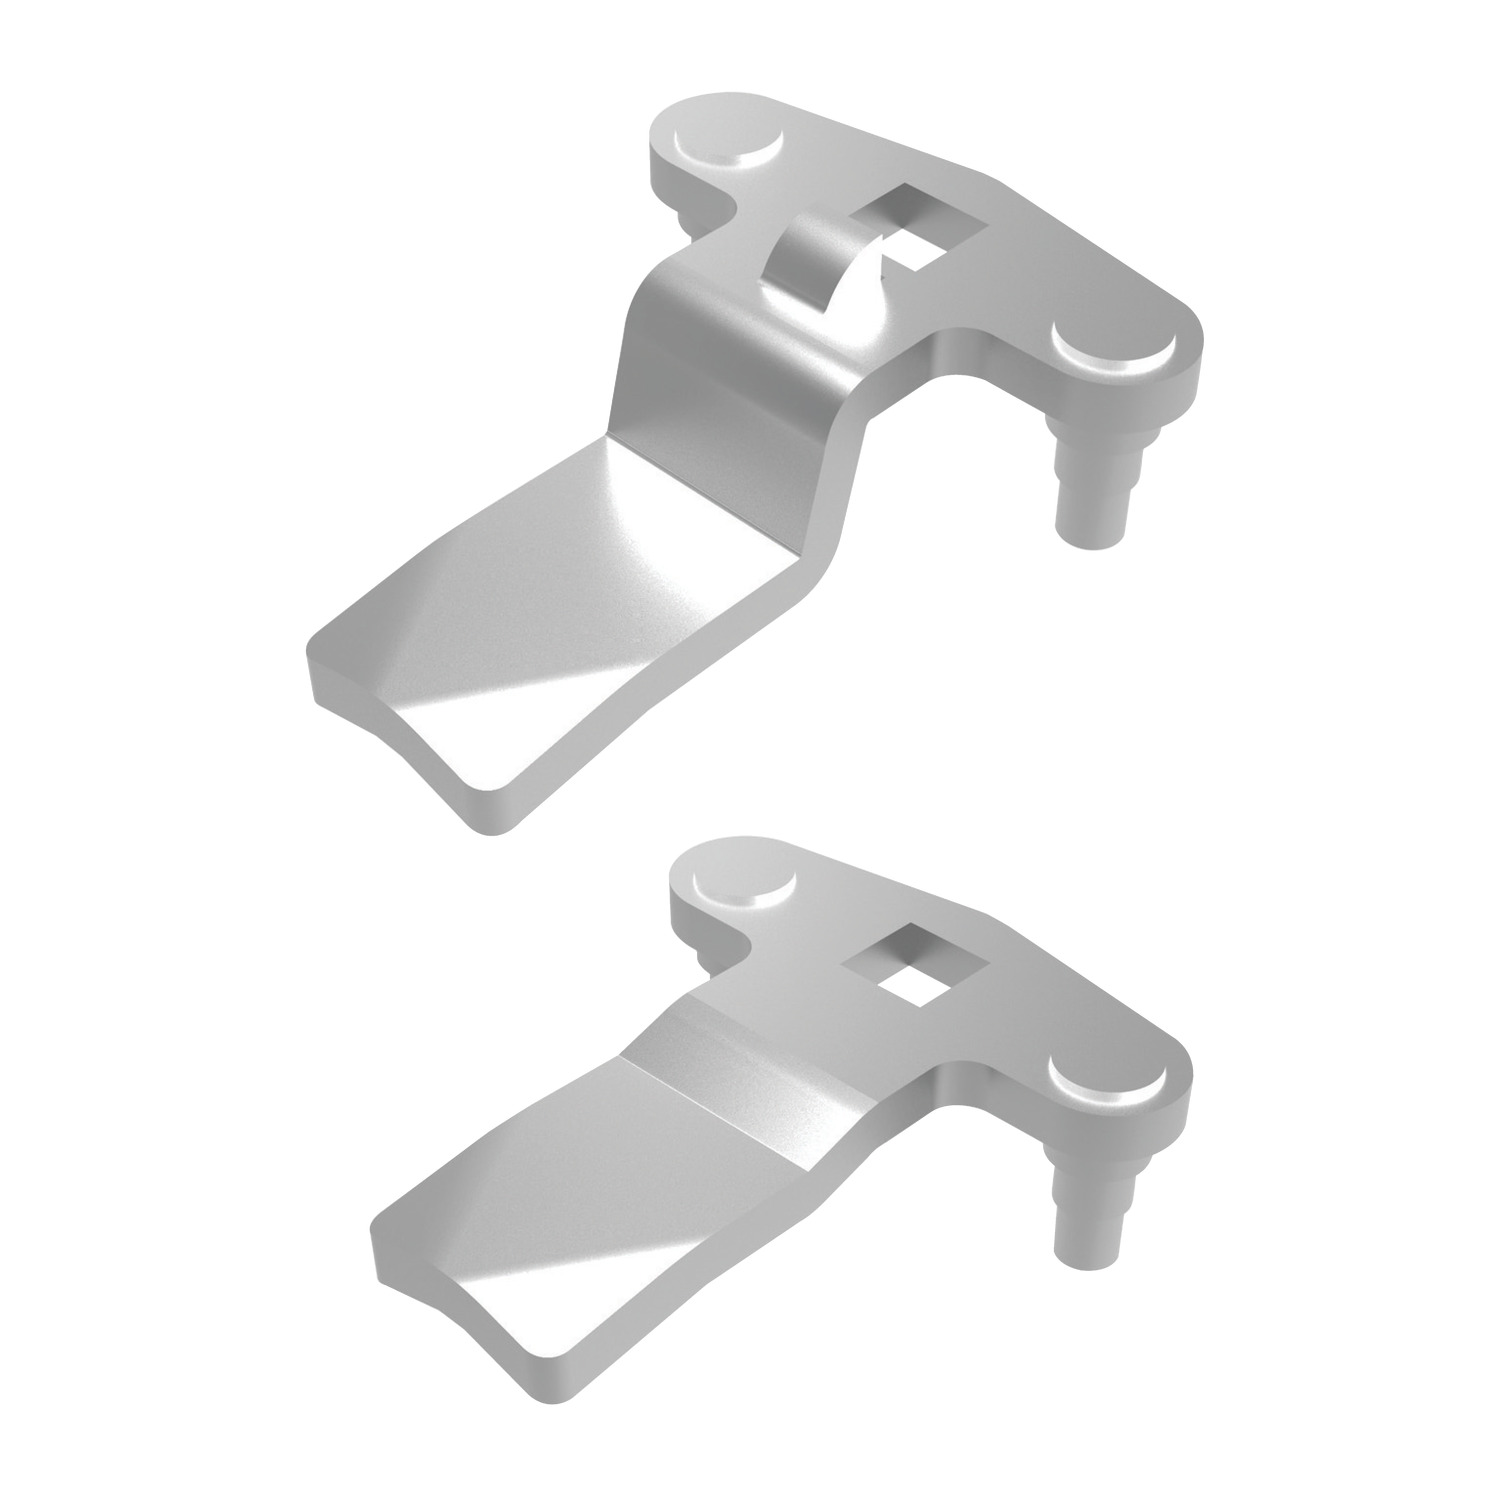 A0240.AW0120 Two Point Cams Flexi for 3-point latching - Steel, zinc plated - Without Projection